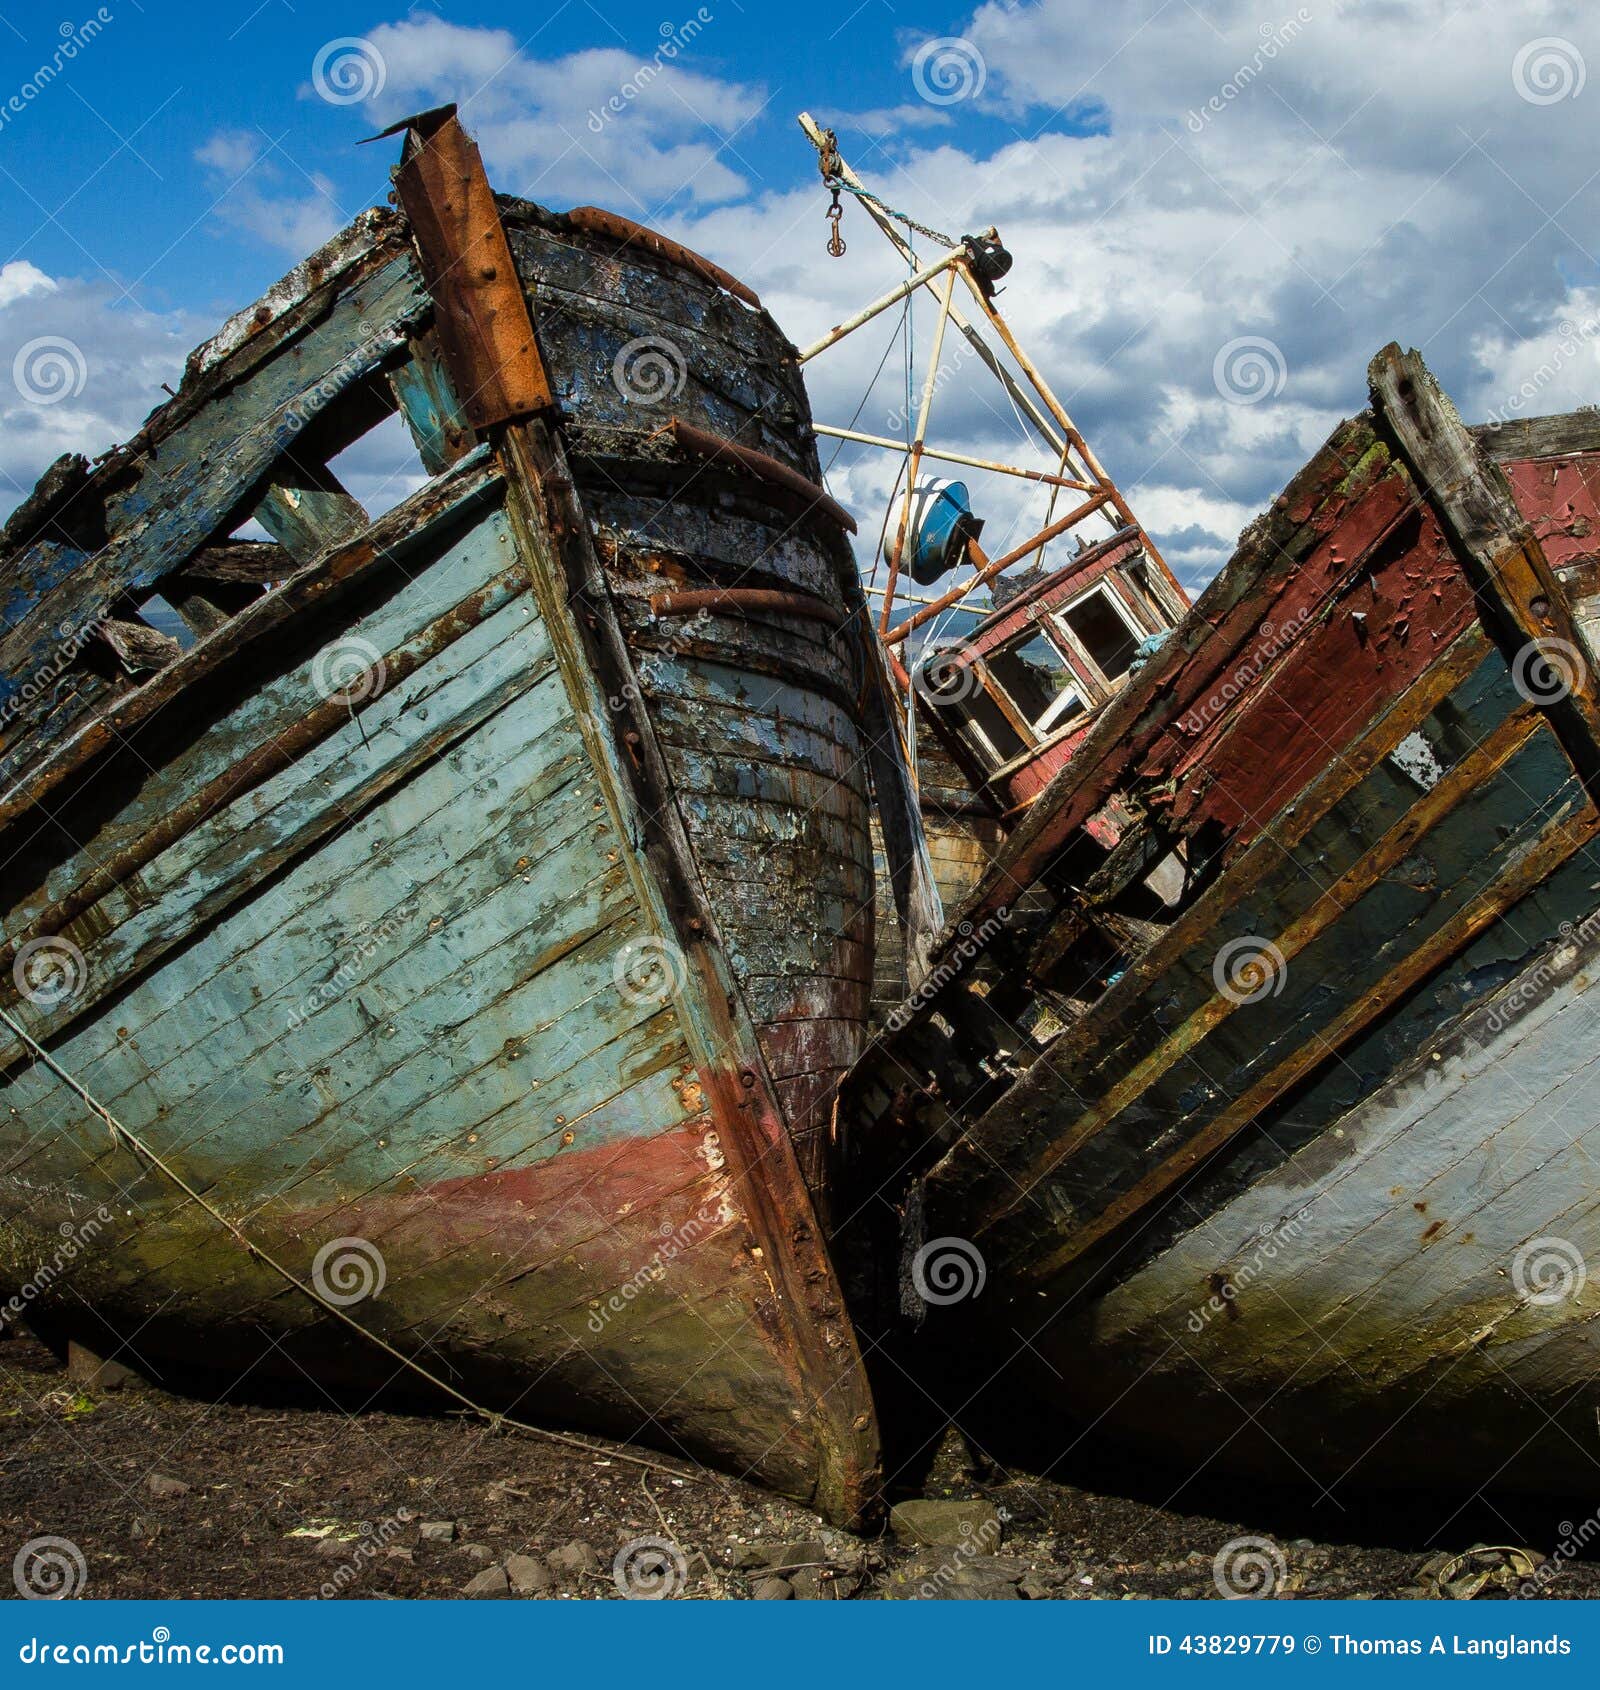 decaying boats